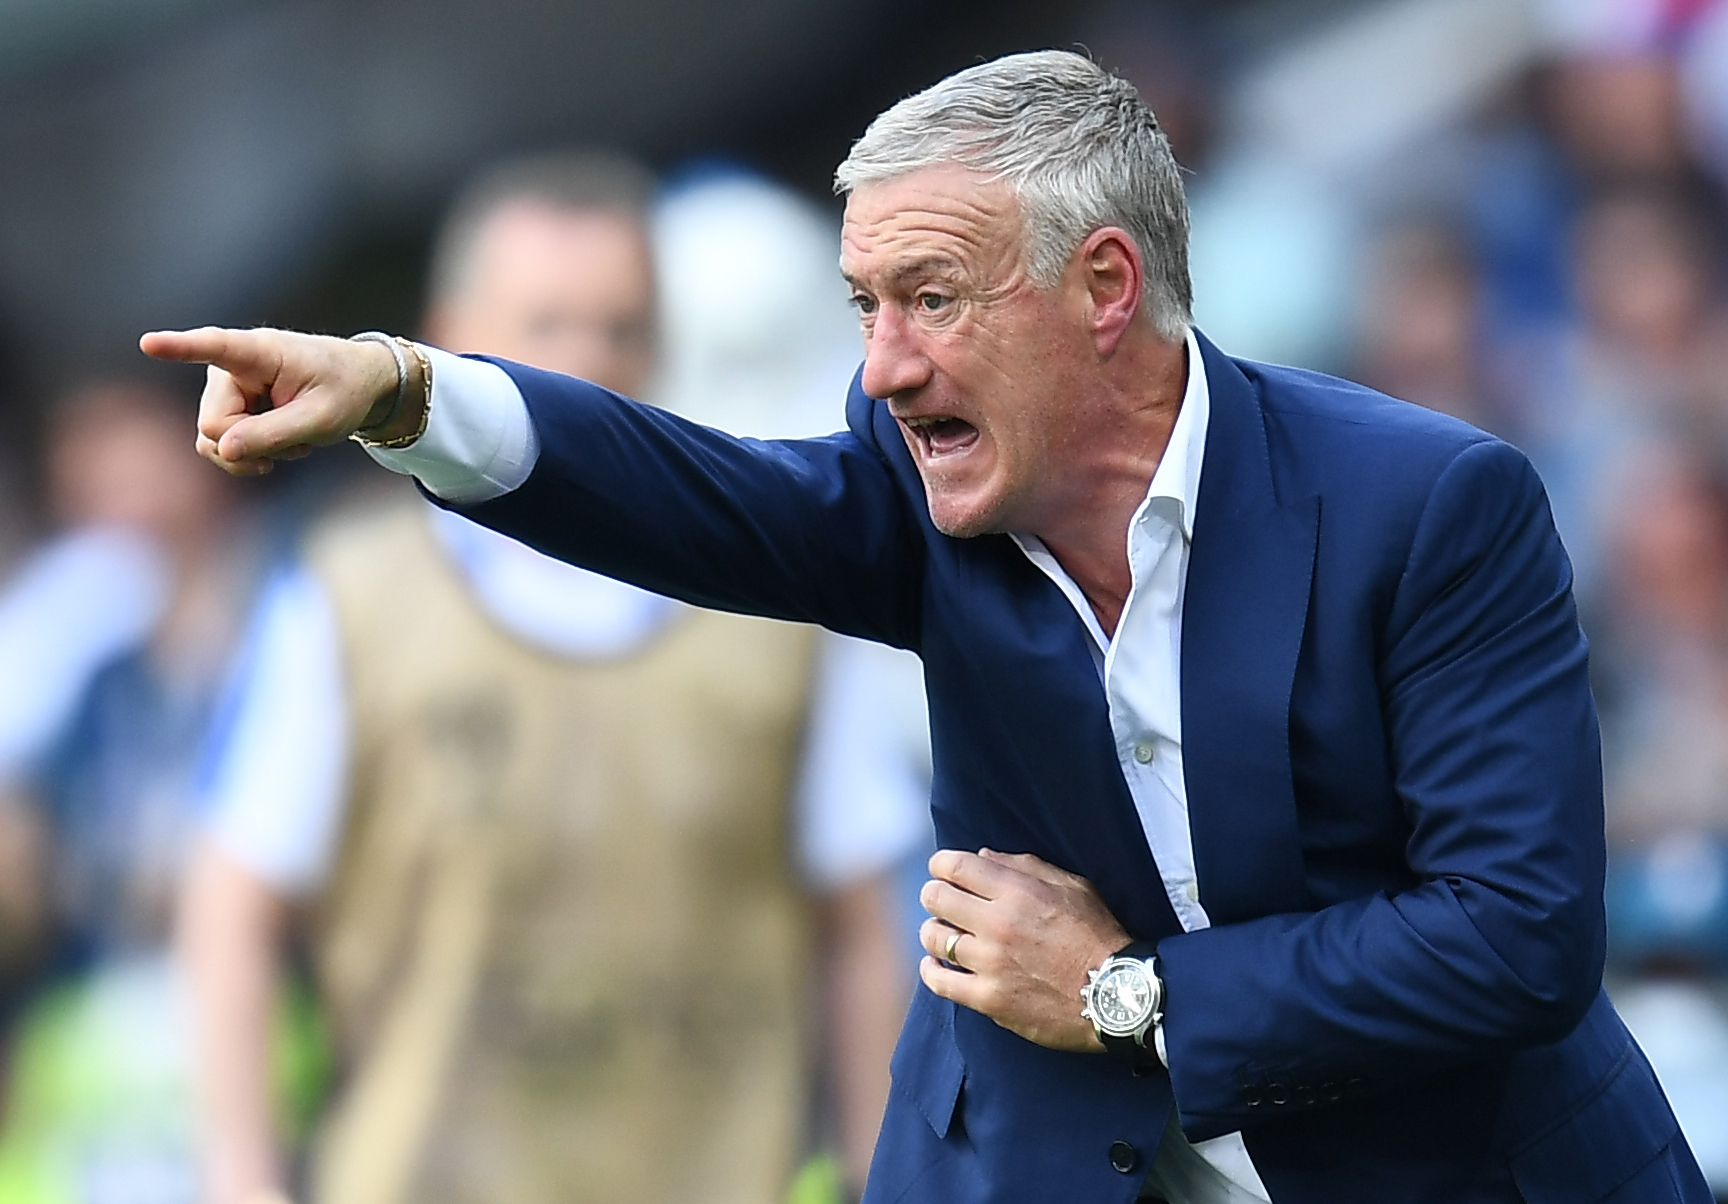 Euro 2016: I had to shake the trees at halftime, says Deschamps